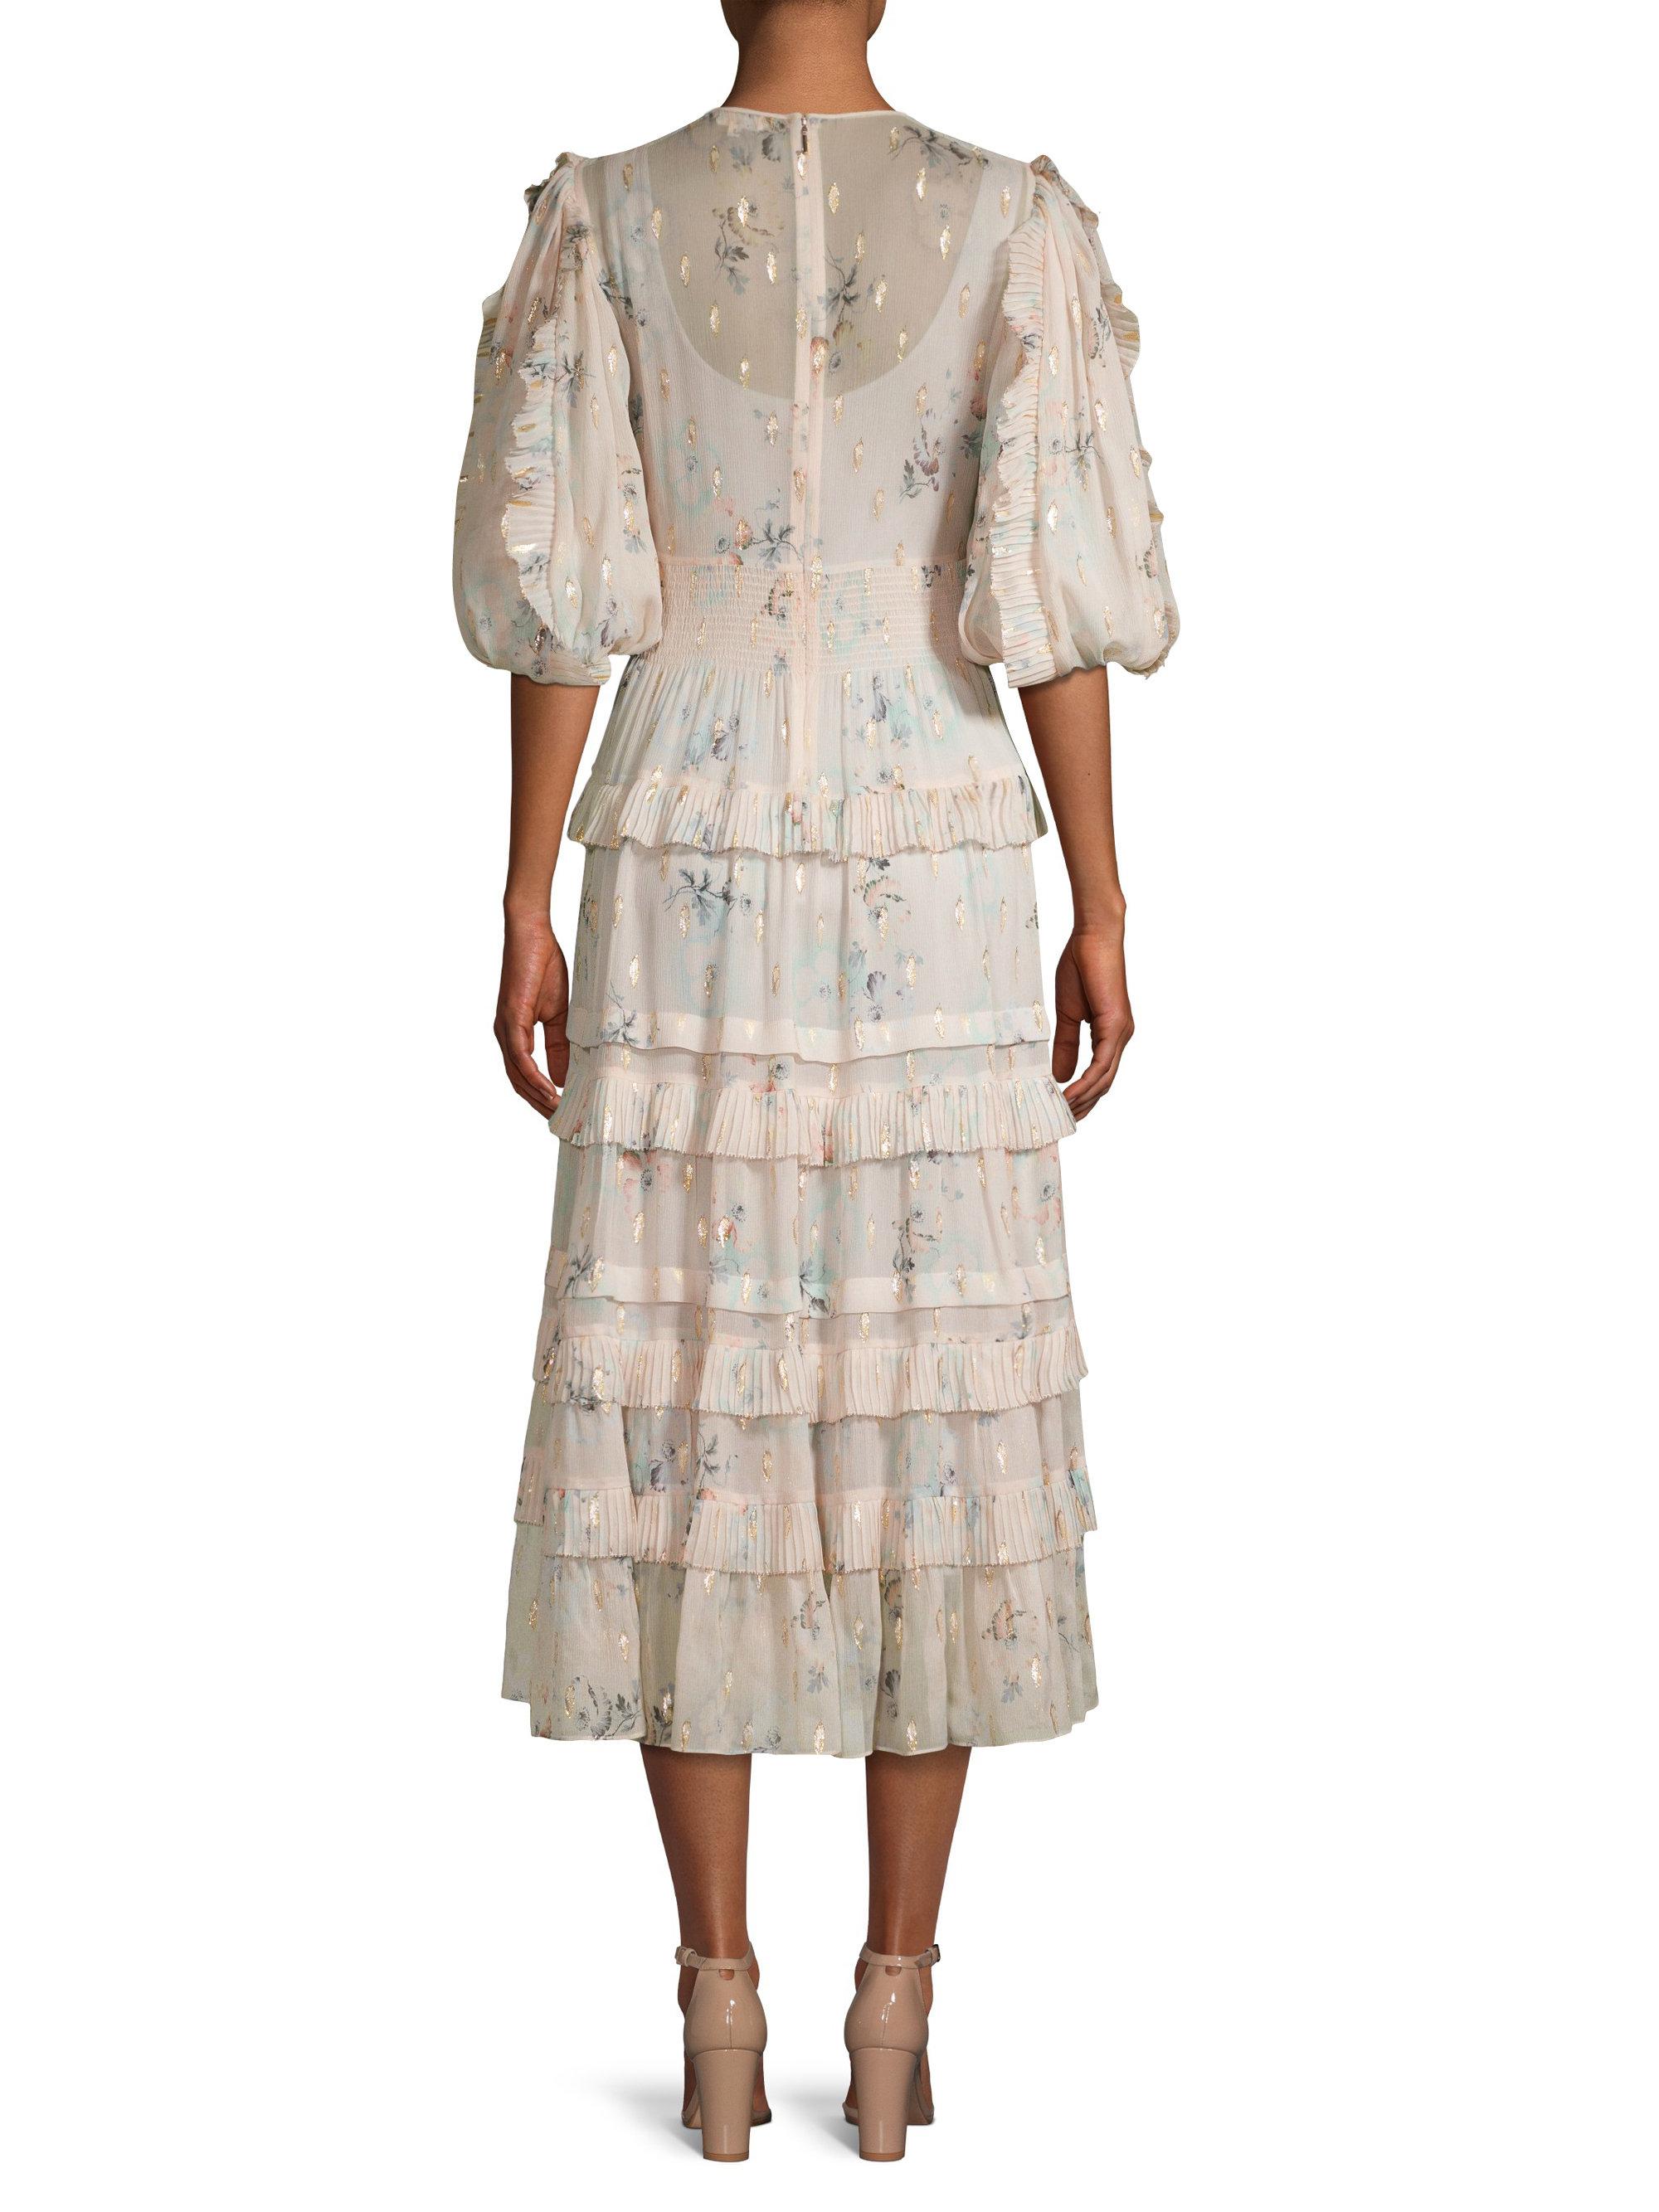 Lyst - Rebecca Taylor Floral Puffed-sleeve Dress in Natural